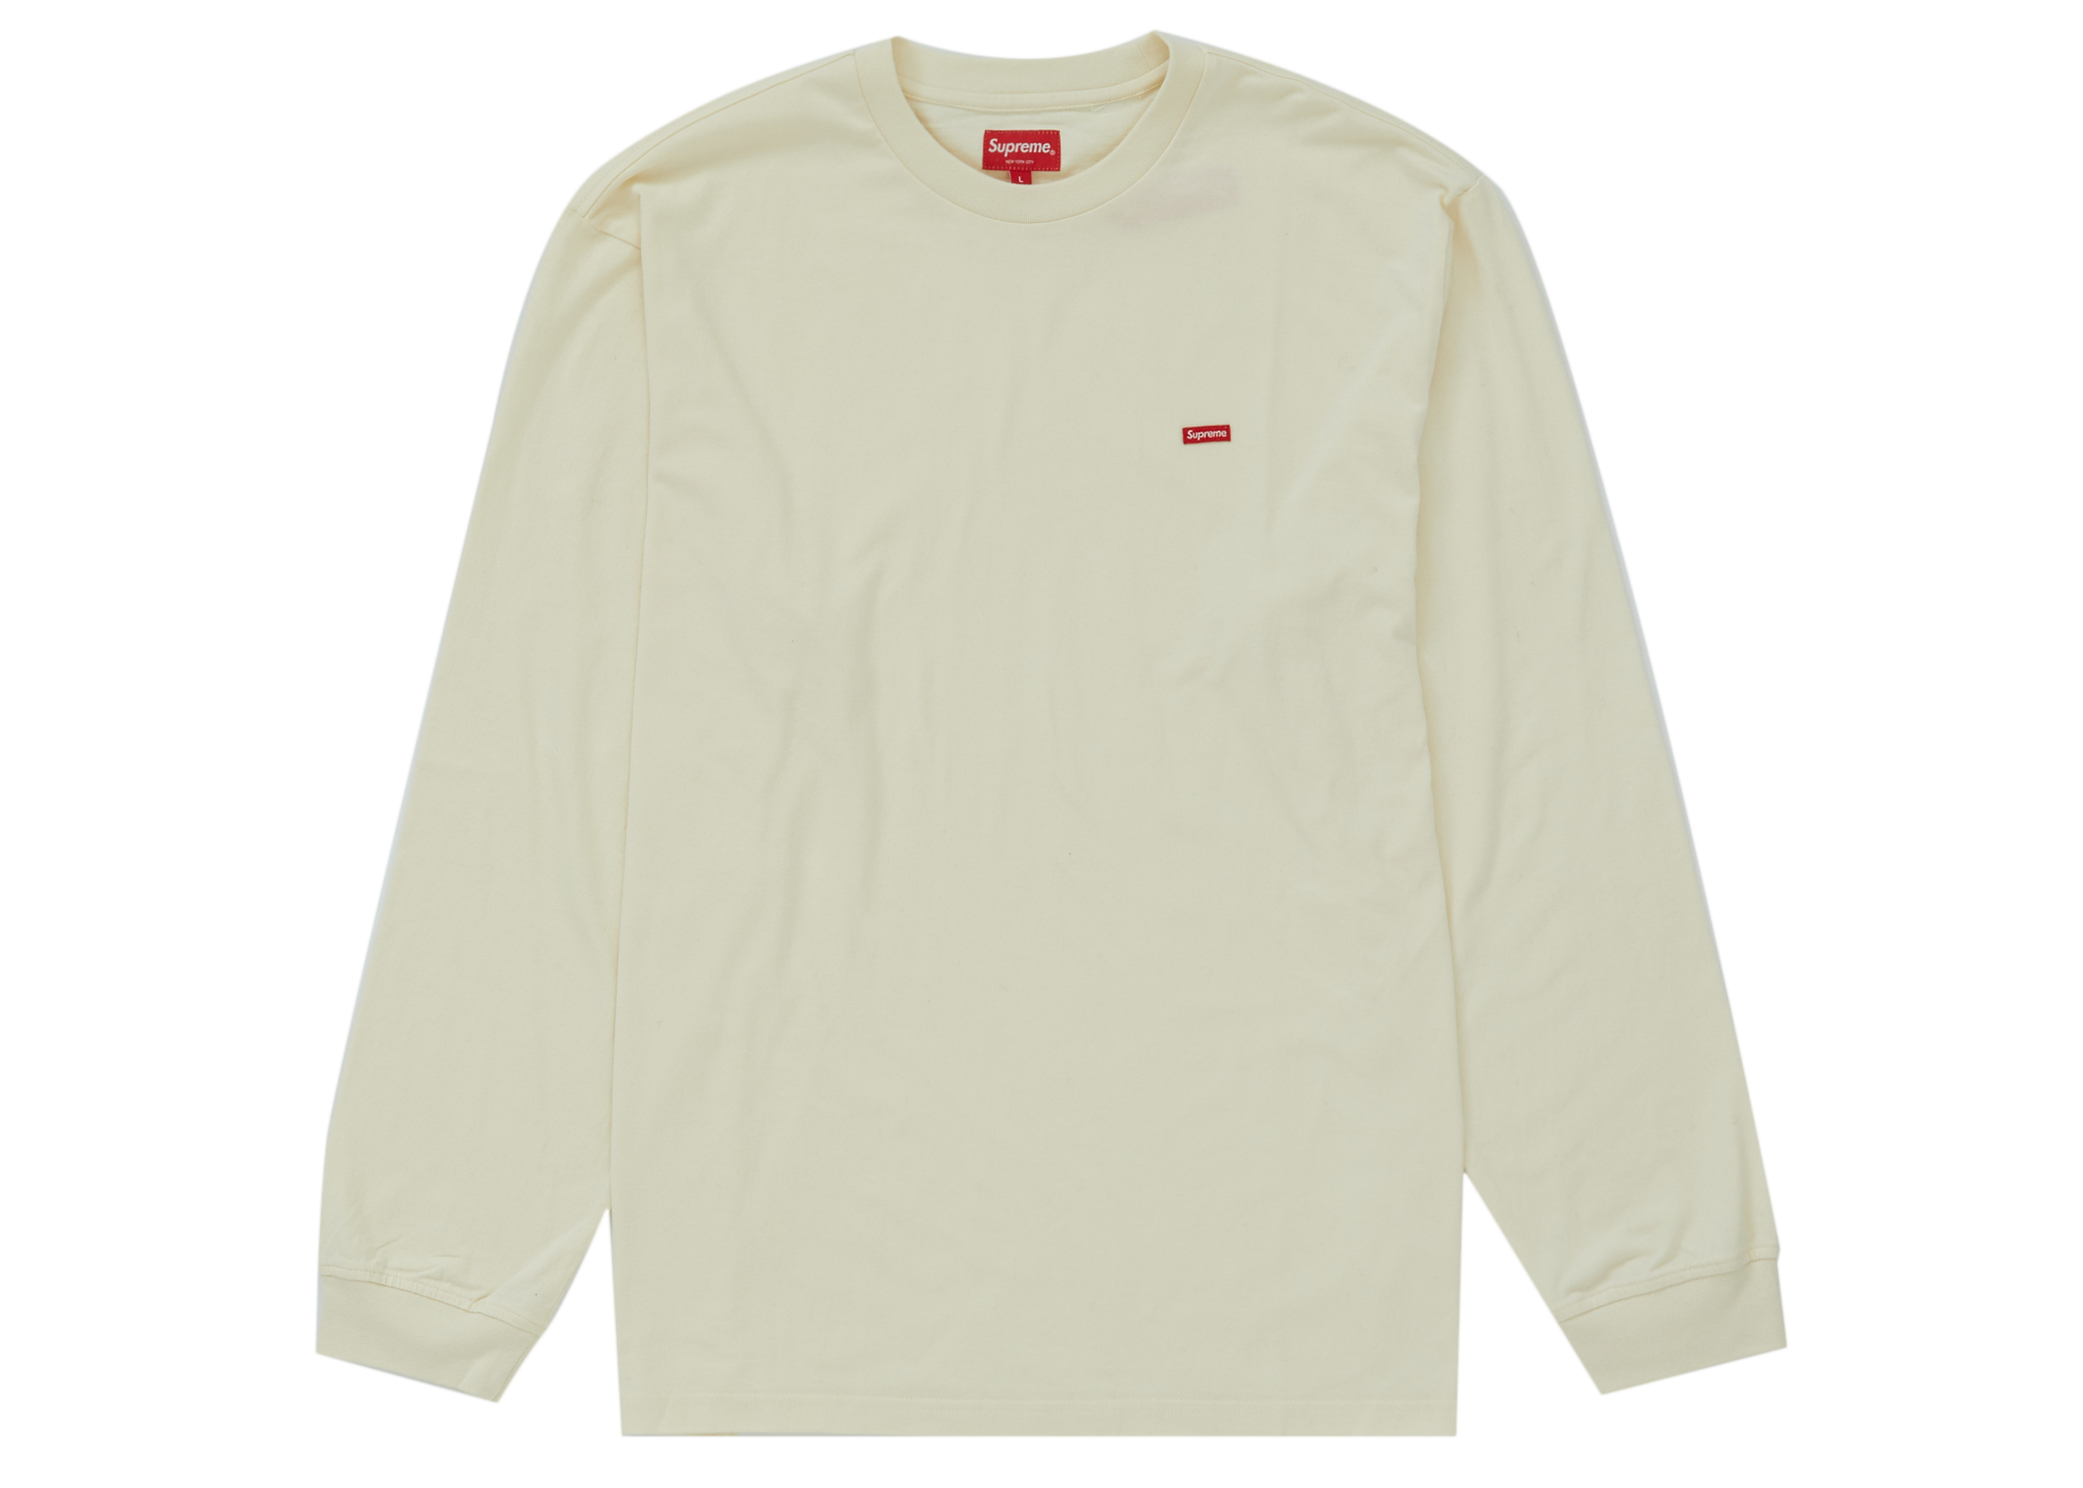 Supreme Small Box L/S Tee Flowers